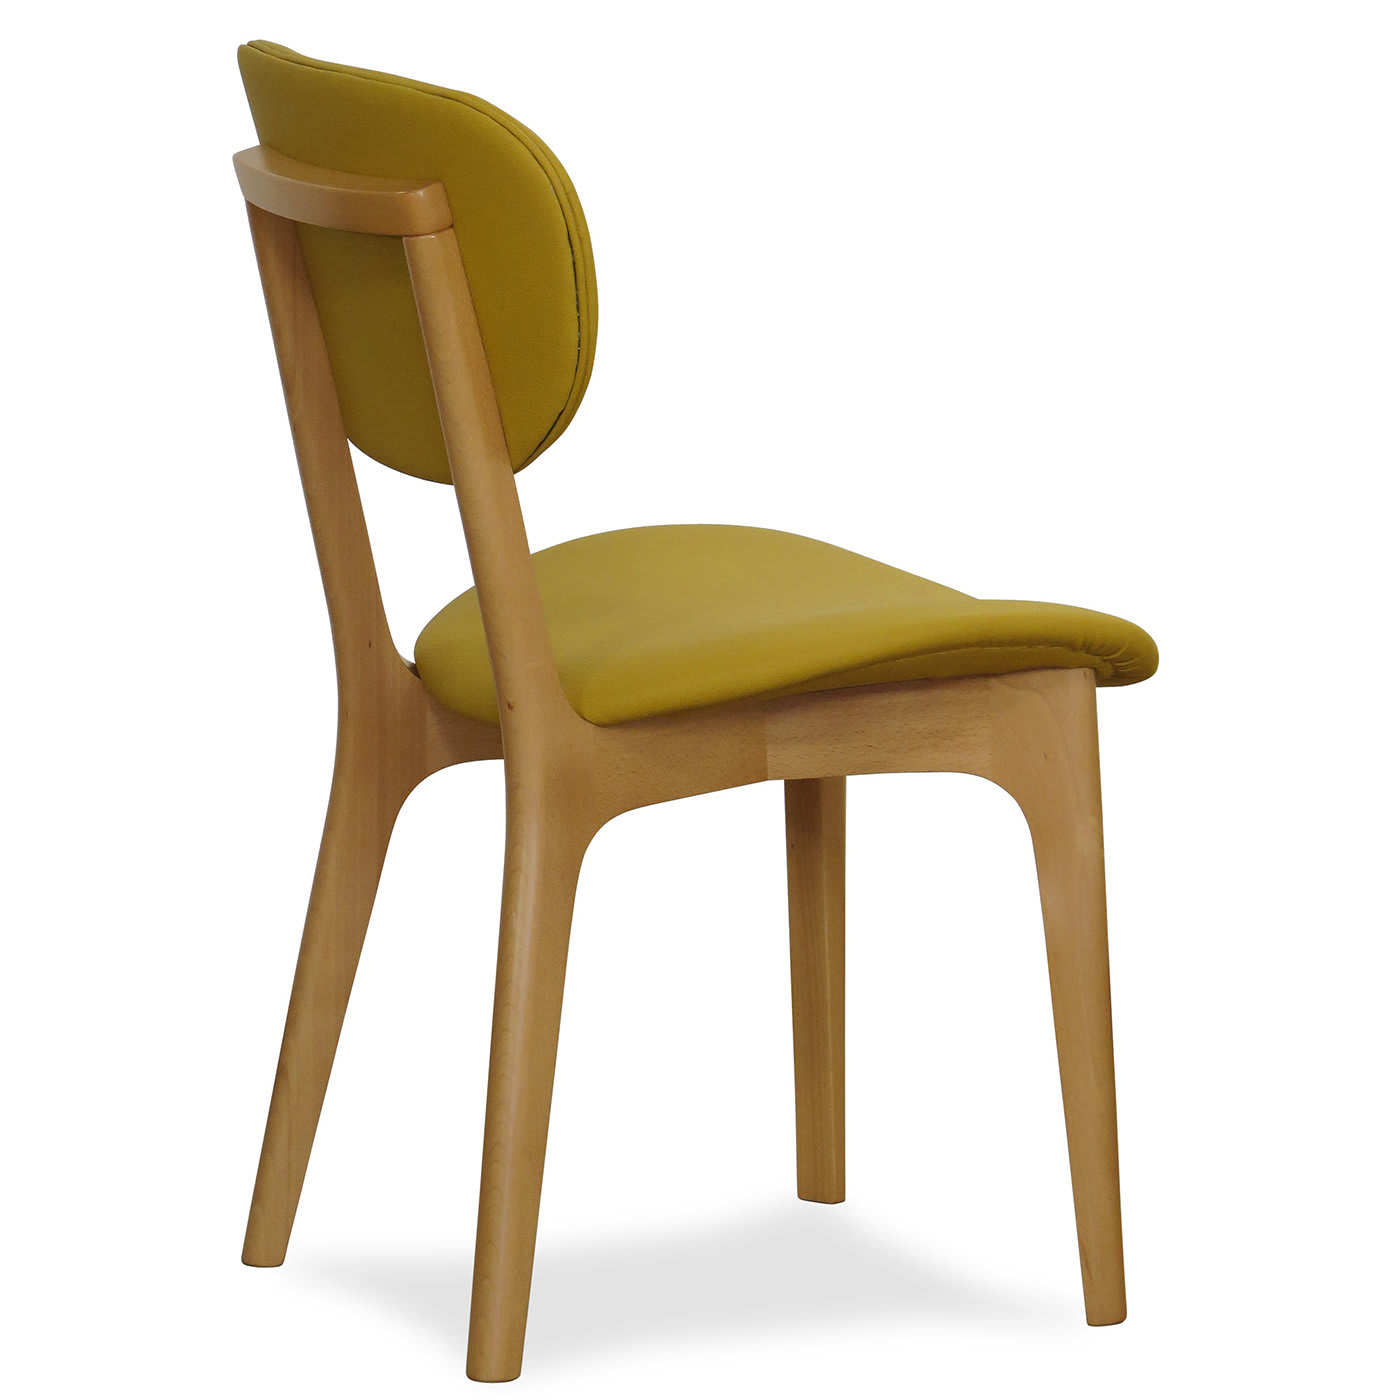 Cozy Set of 2 Mustard Chairs by Giacomo Cattani - BP Sedie